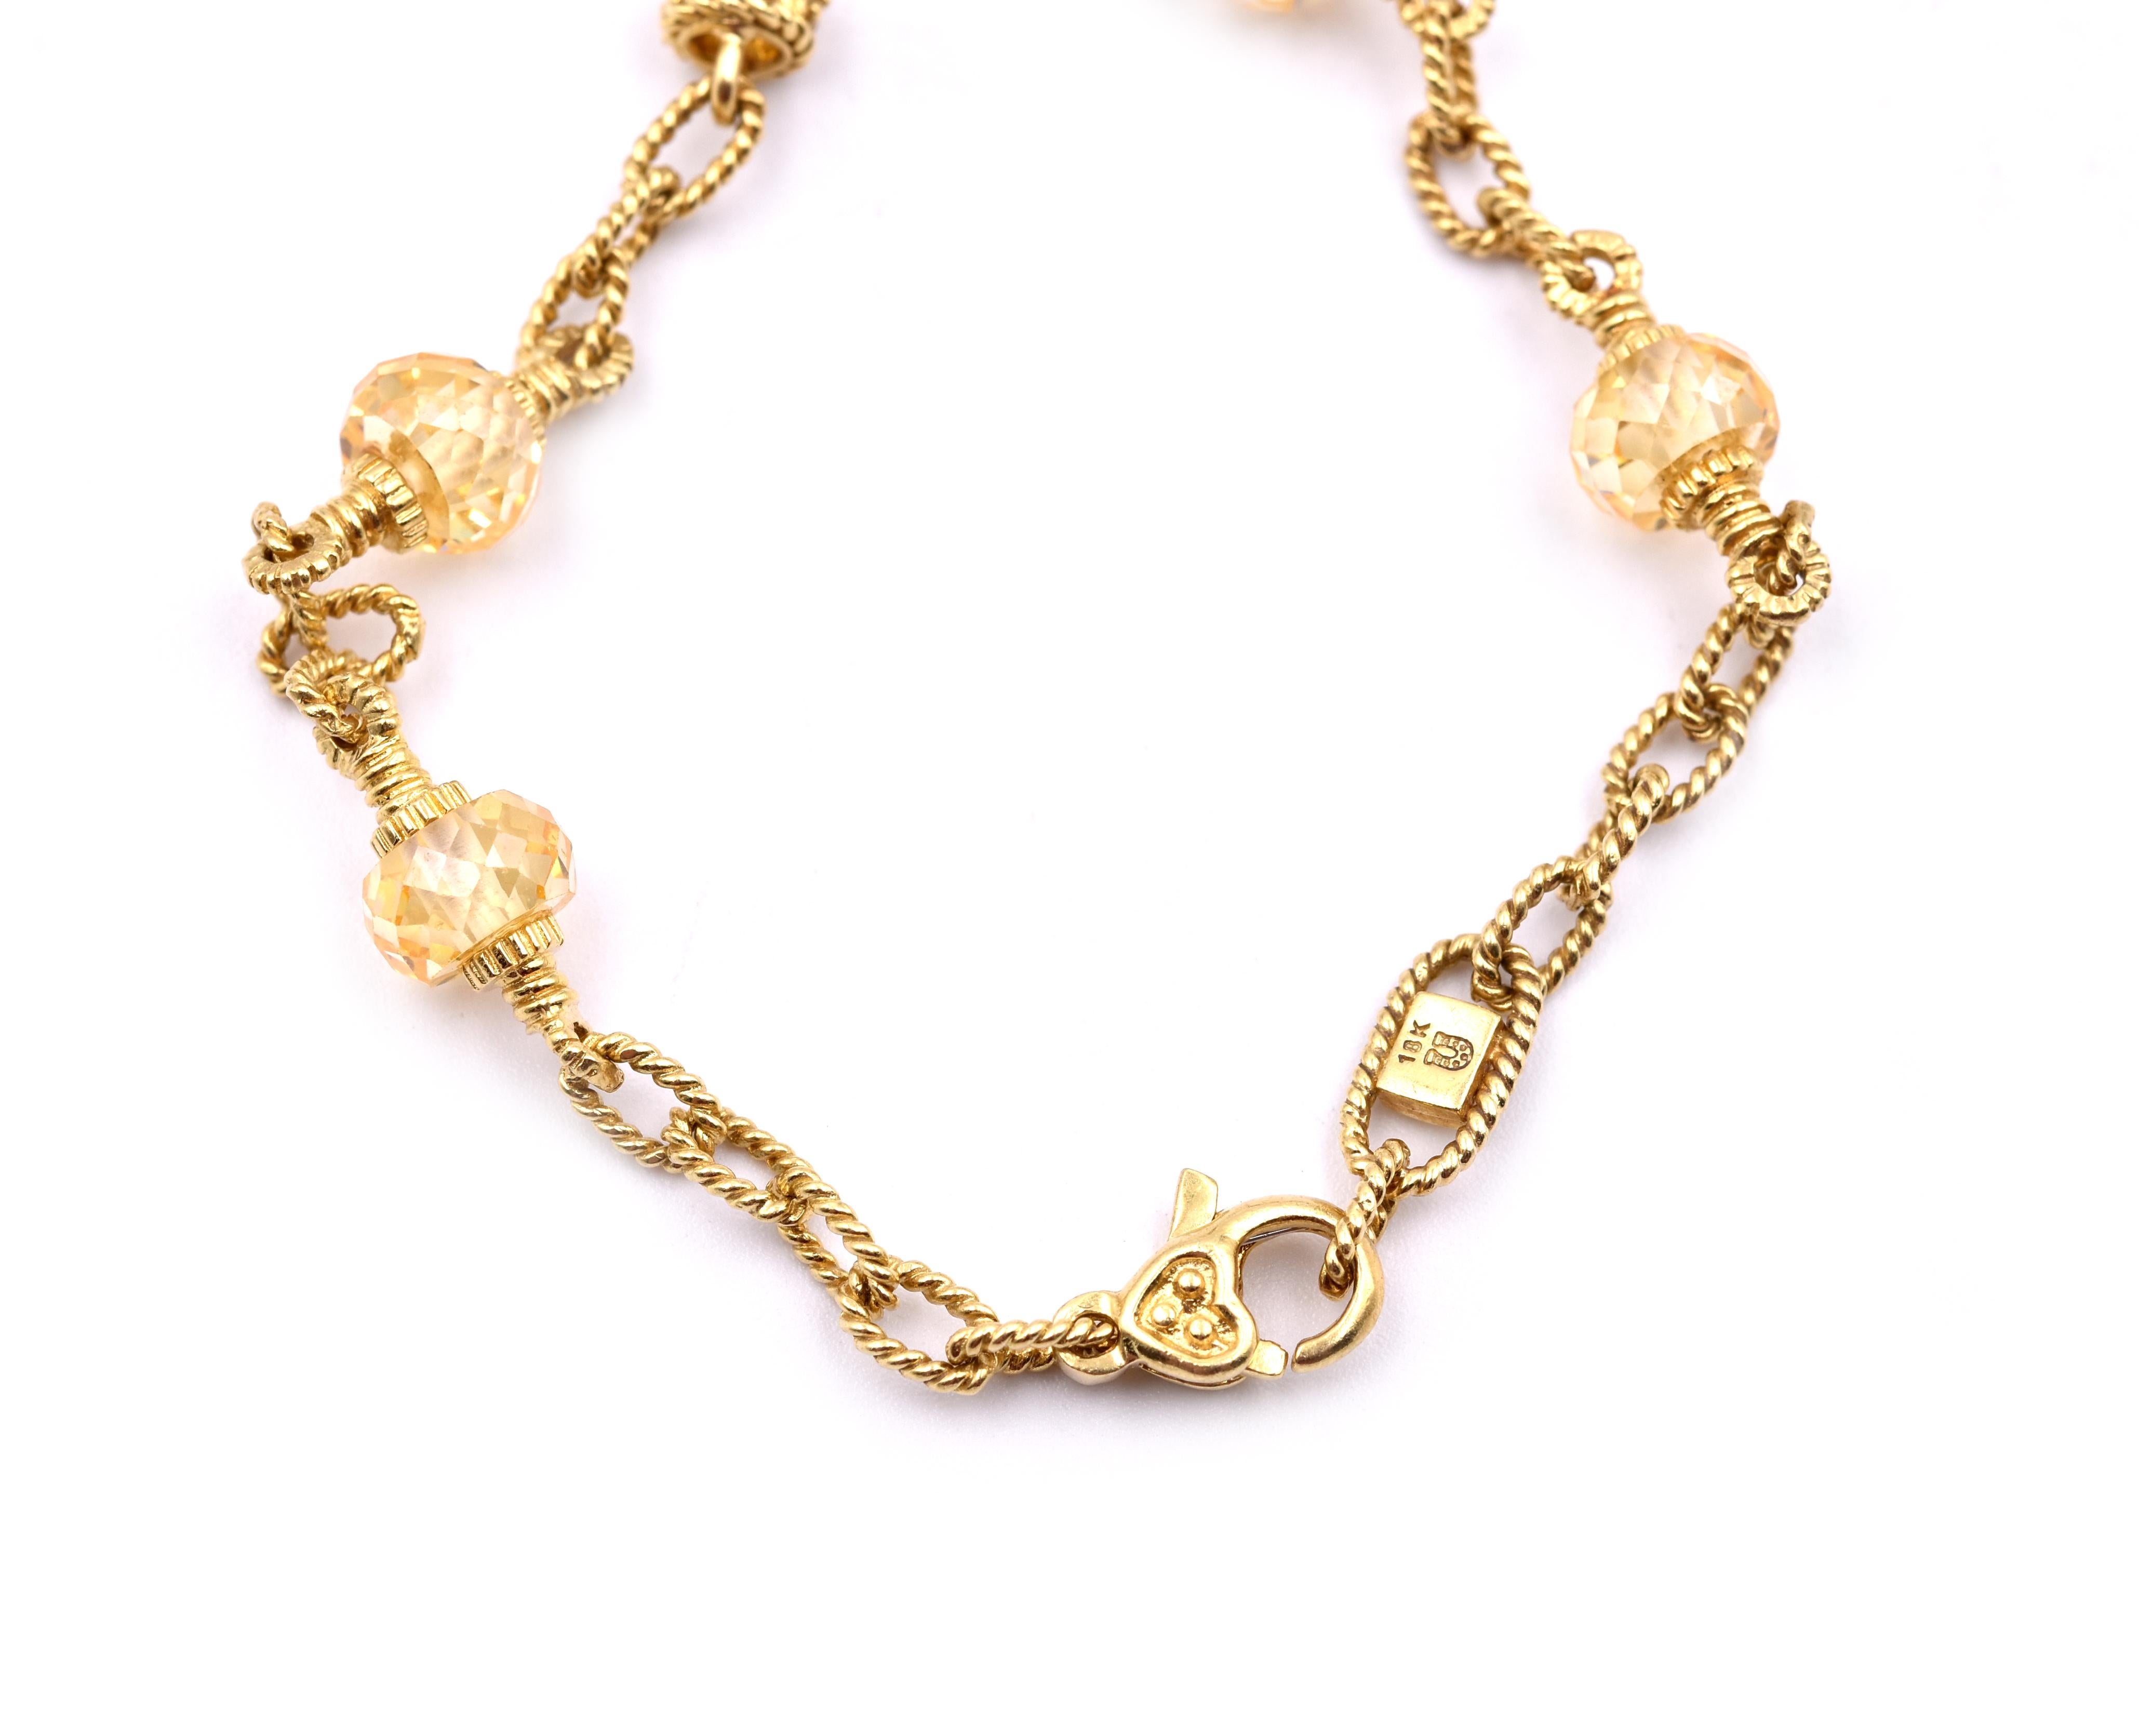 Judith Ripka 18 Karat Yellow Gold Canary Crystal and Yellow Sapphire Necklace In Excellent Condition For Sale In Scottsdale, AZ